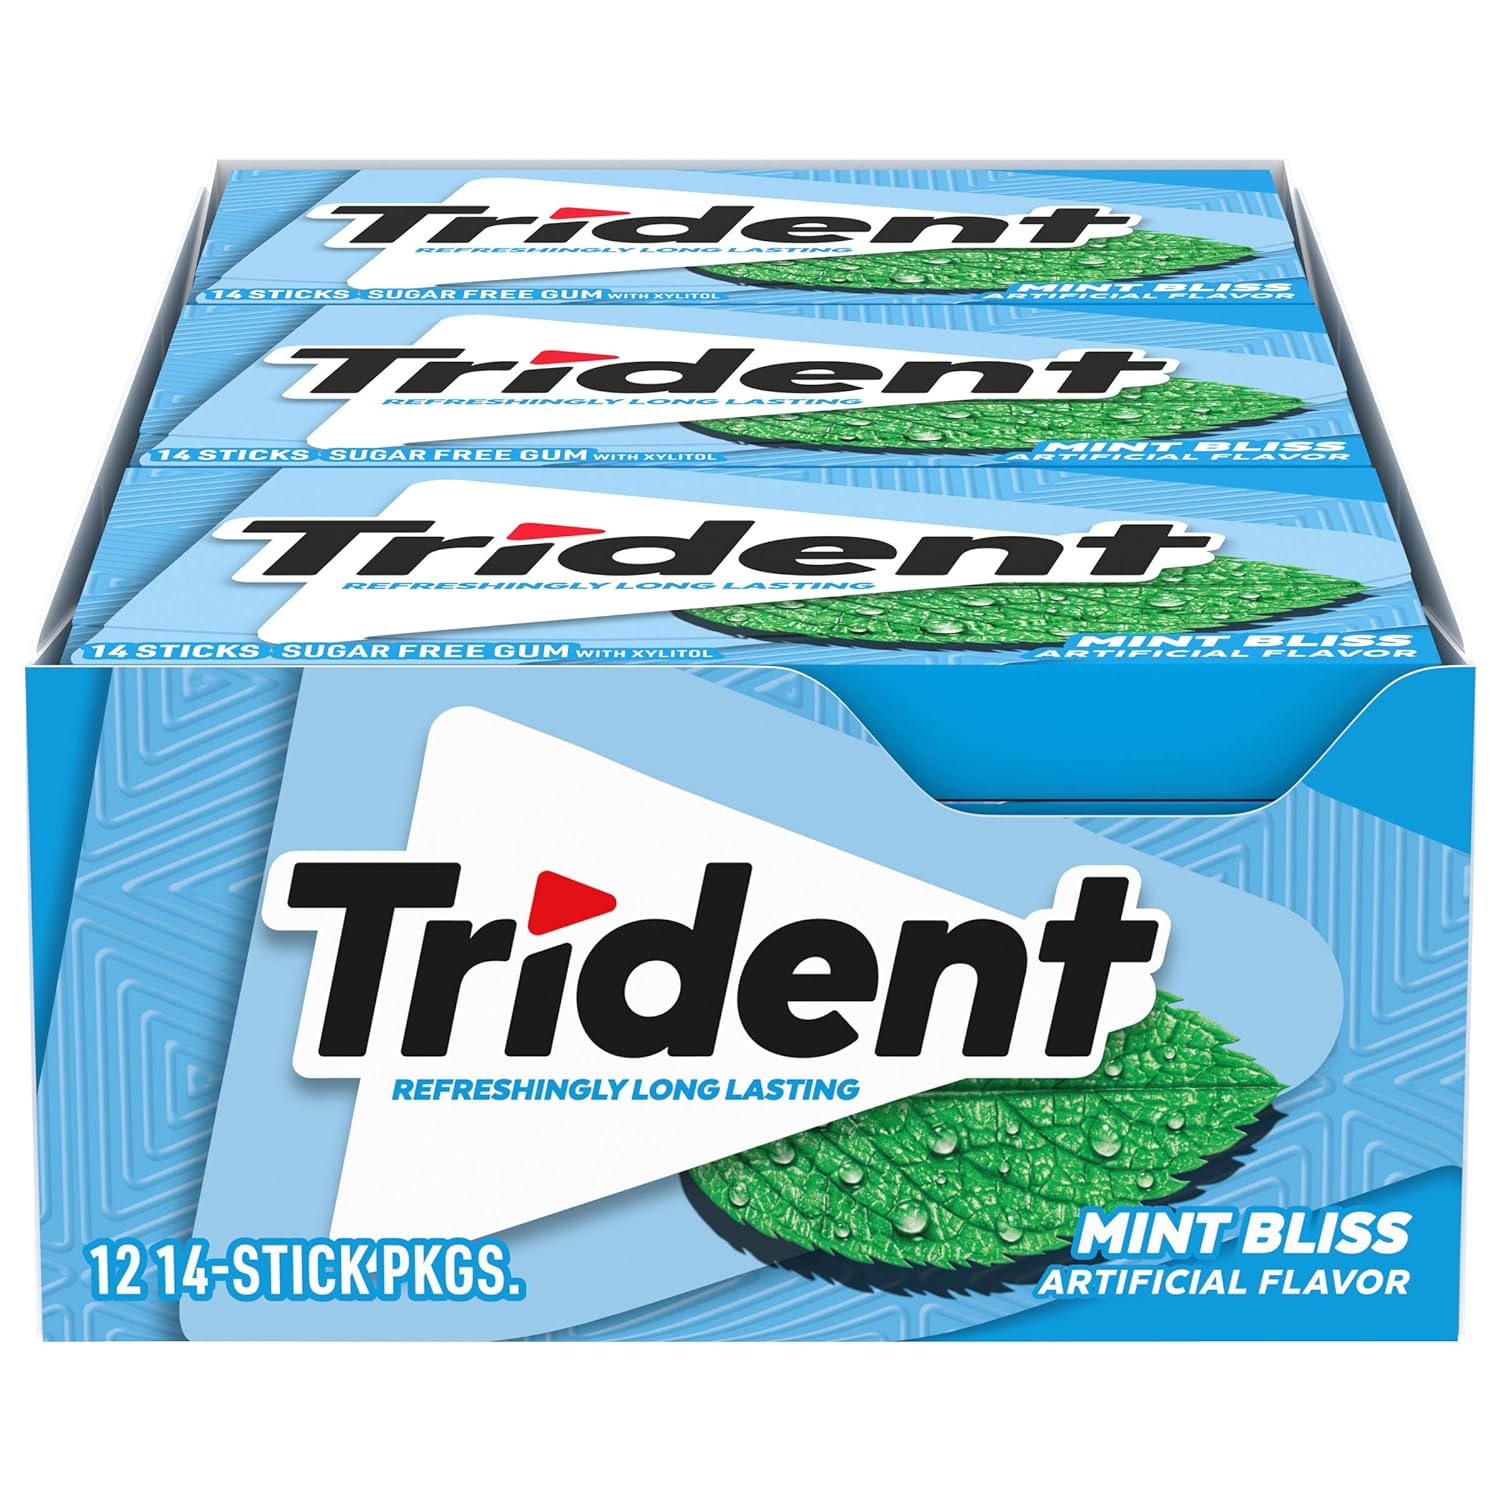 [S&S] $9.89: Trident Mint Bliss Sugar Free Gum, 12 Packs of 14 Pieces (168 Total Pieces) @ Amazon